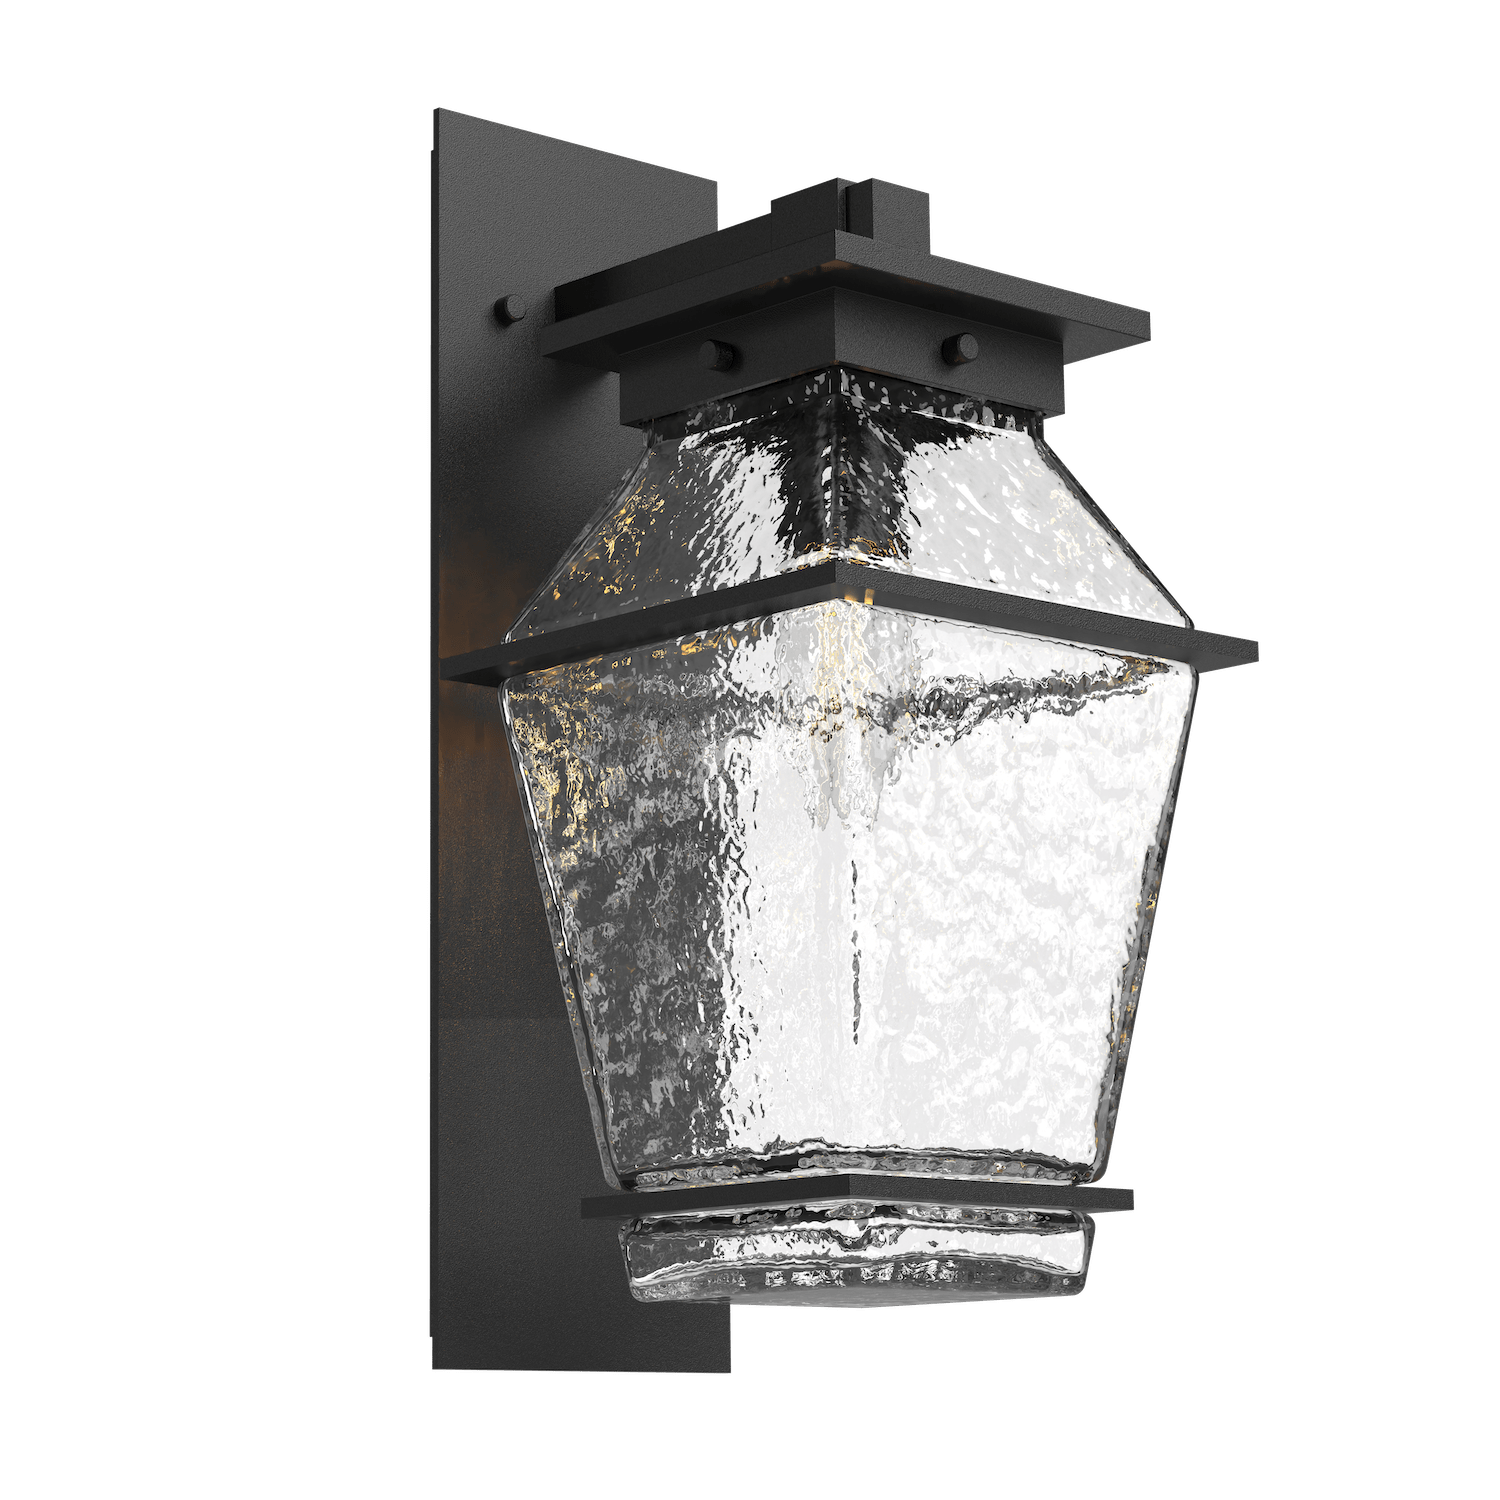 ODB0077-01-TB-C-Hammerton-Studio-Landmark-16-inch-outdoor-arm-sconce-with-textured-black-finish-and-clear-blown-glass-shades-and-incandescent-lamping